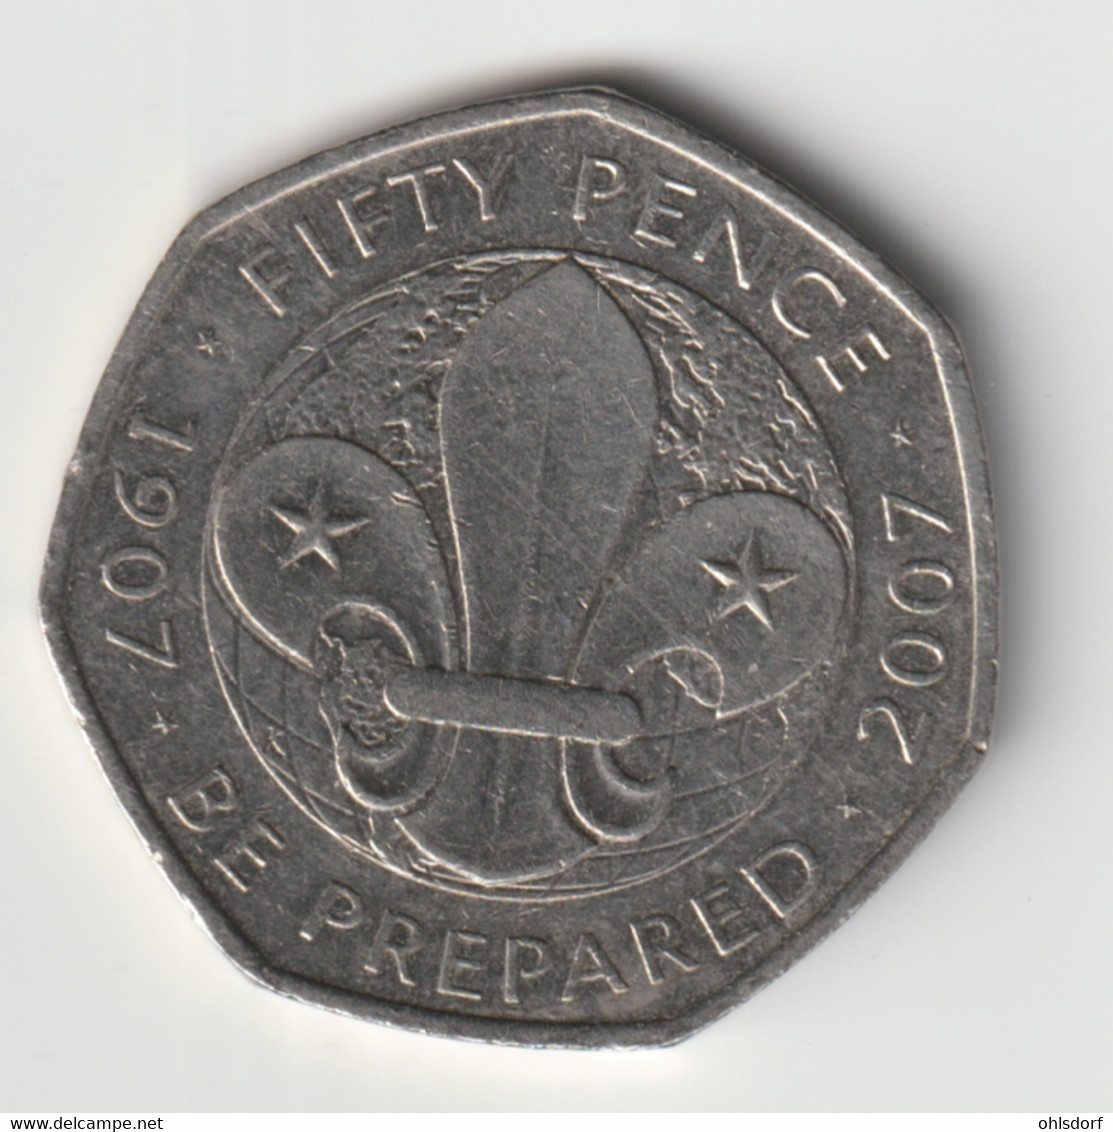 GREAT BRITAIN 2007: 50 Pence, Scouting Movement, KM 1073 - 50 Pence